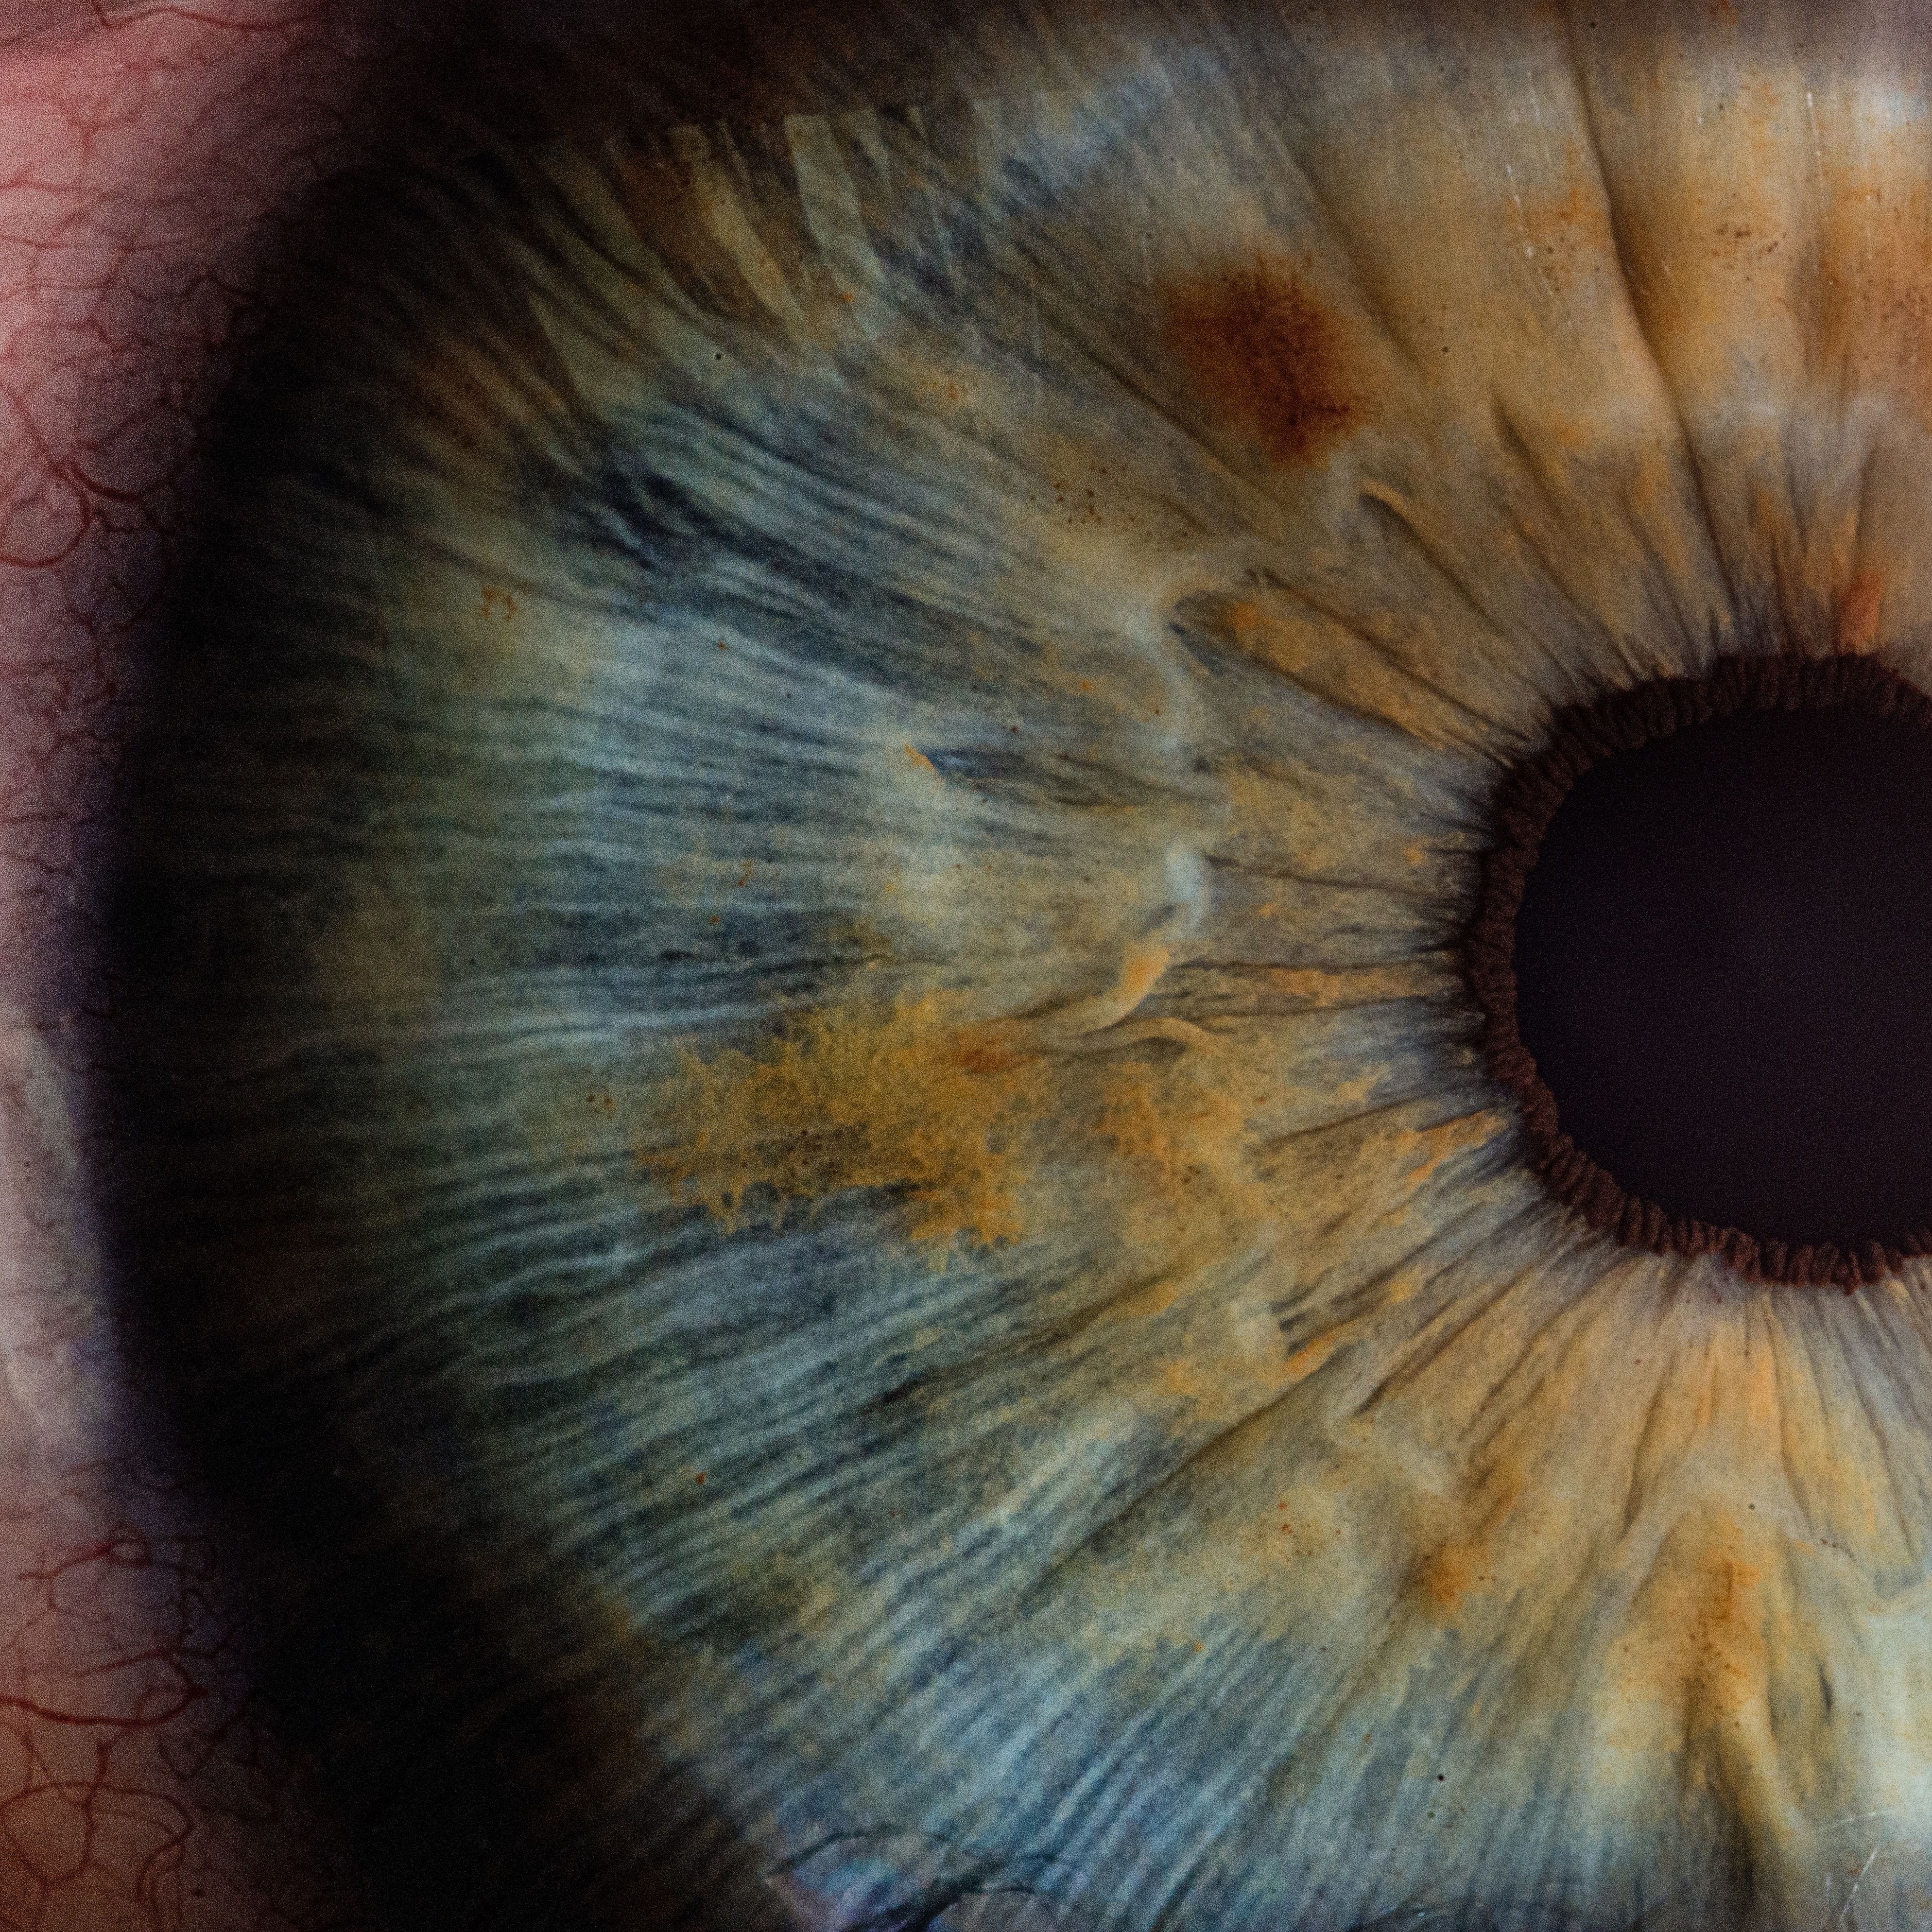 Ophthalmology Month in Review: January 2023